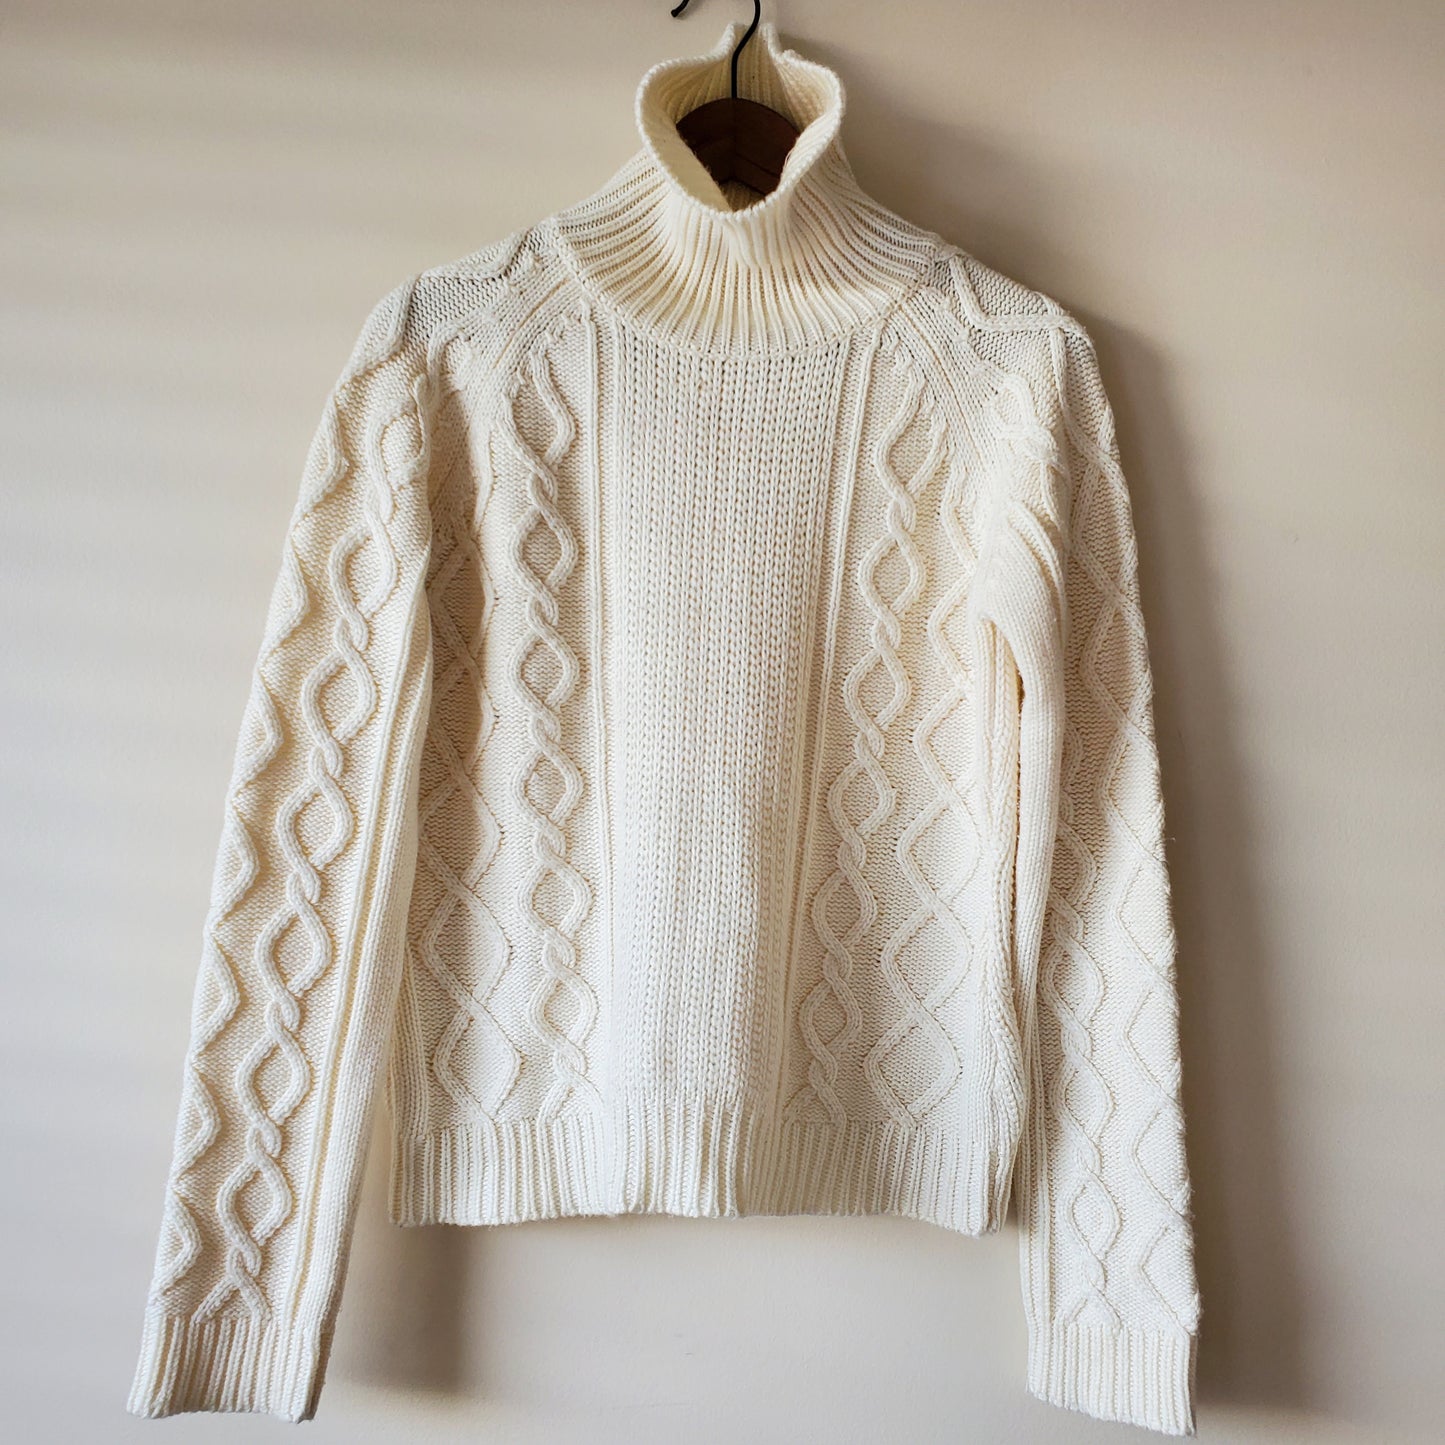 Classic cable knit sweater